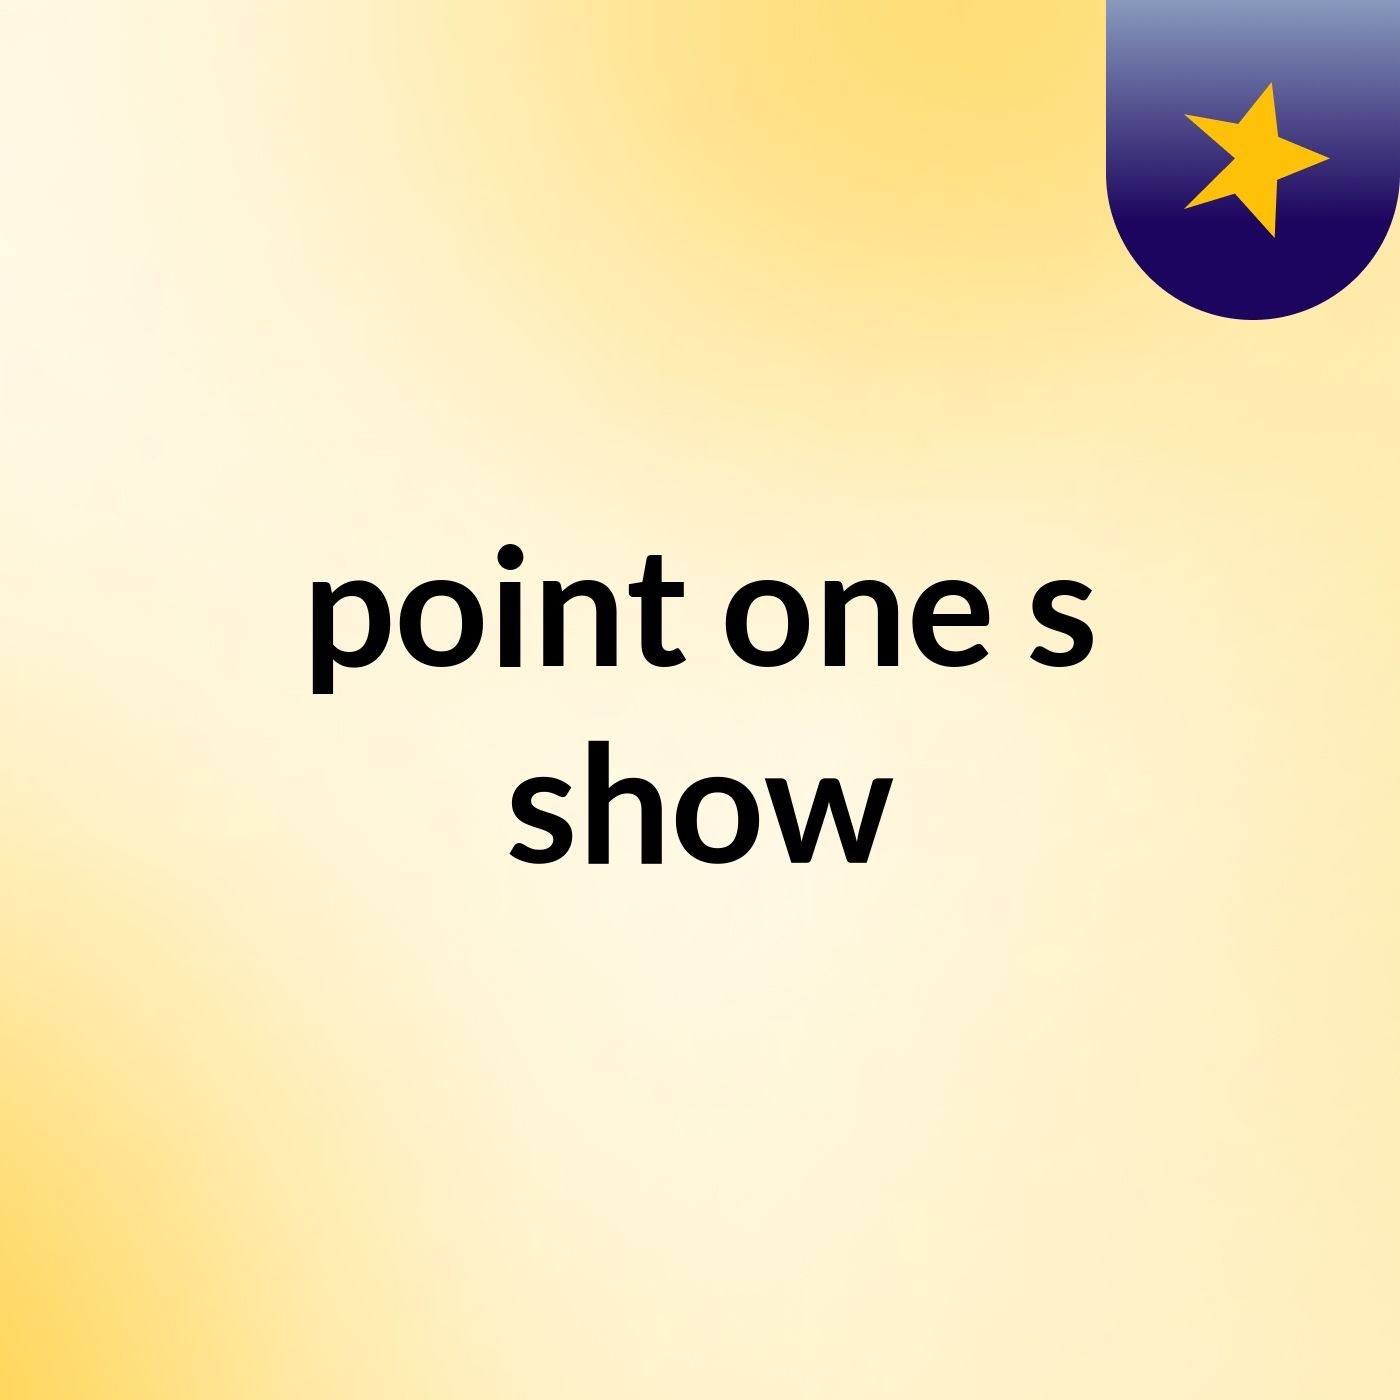 point one's show